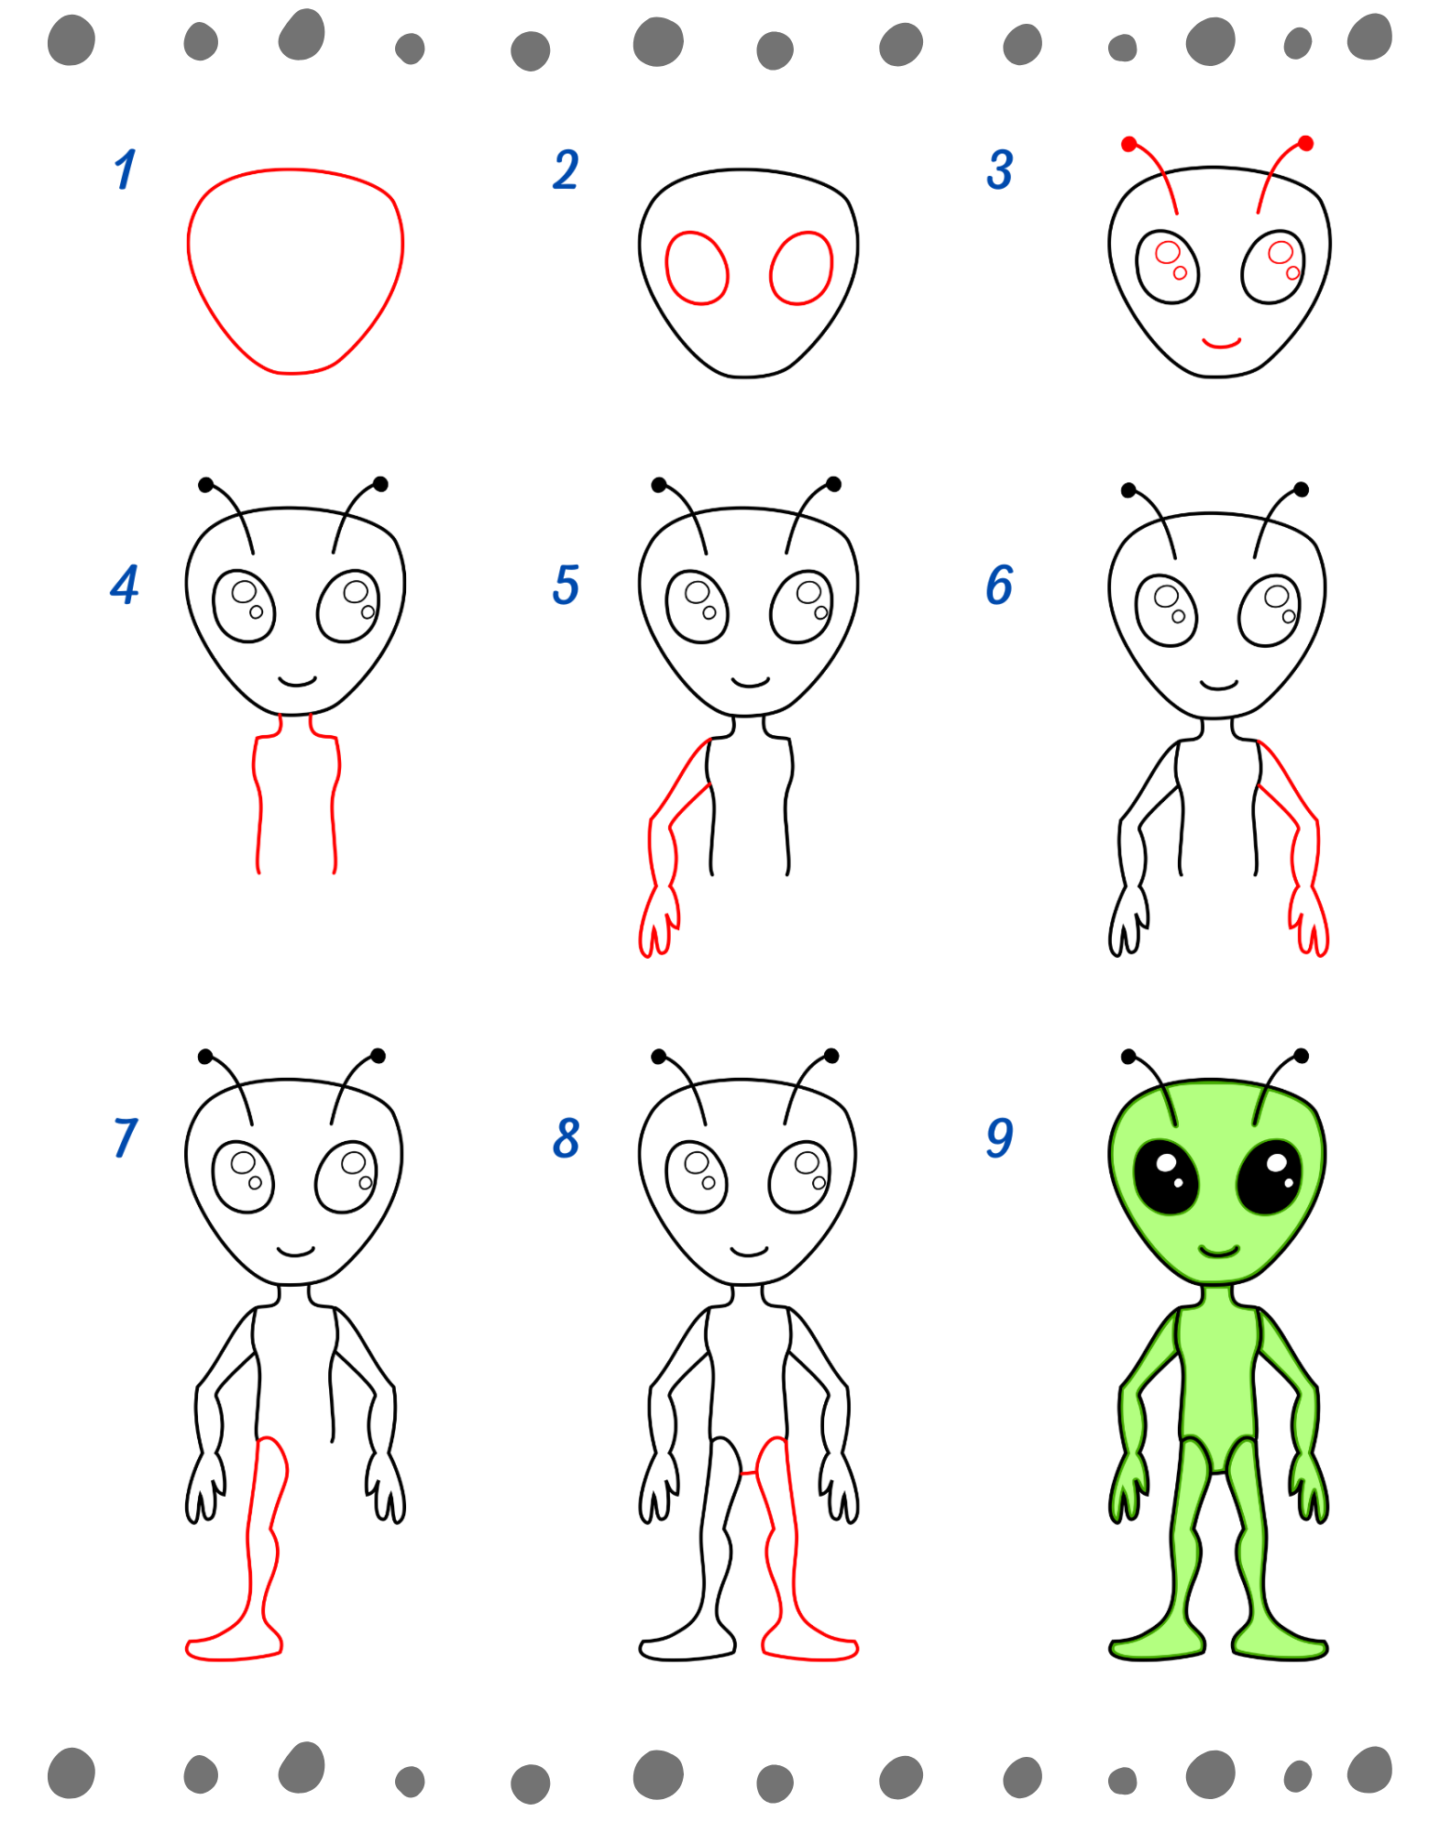 How To Draw An Alien: Easy Step-By-Step Tutorial with Pictures